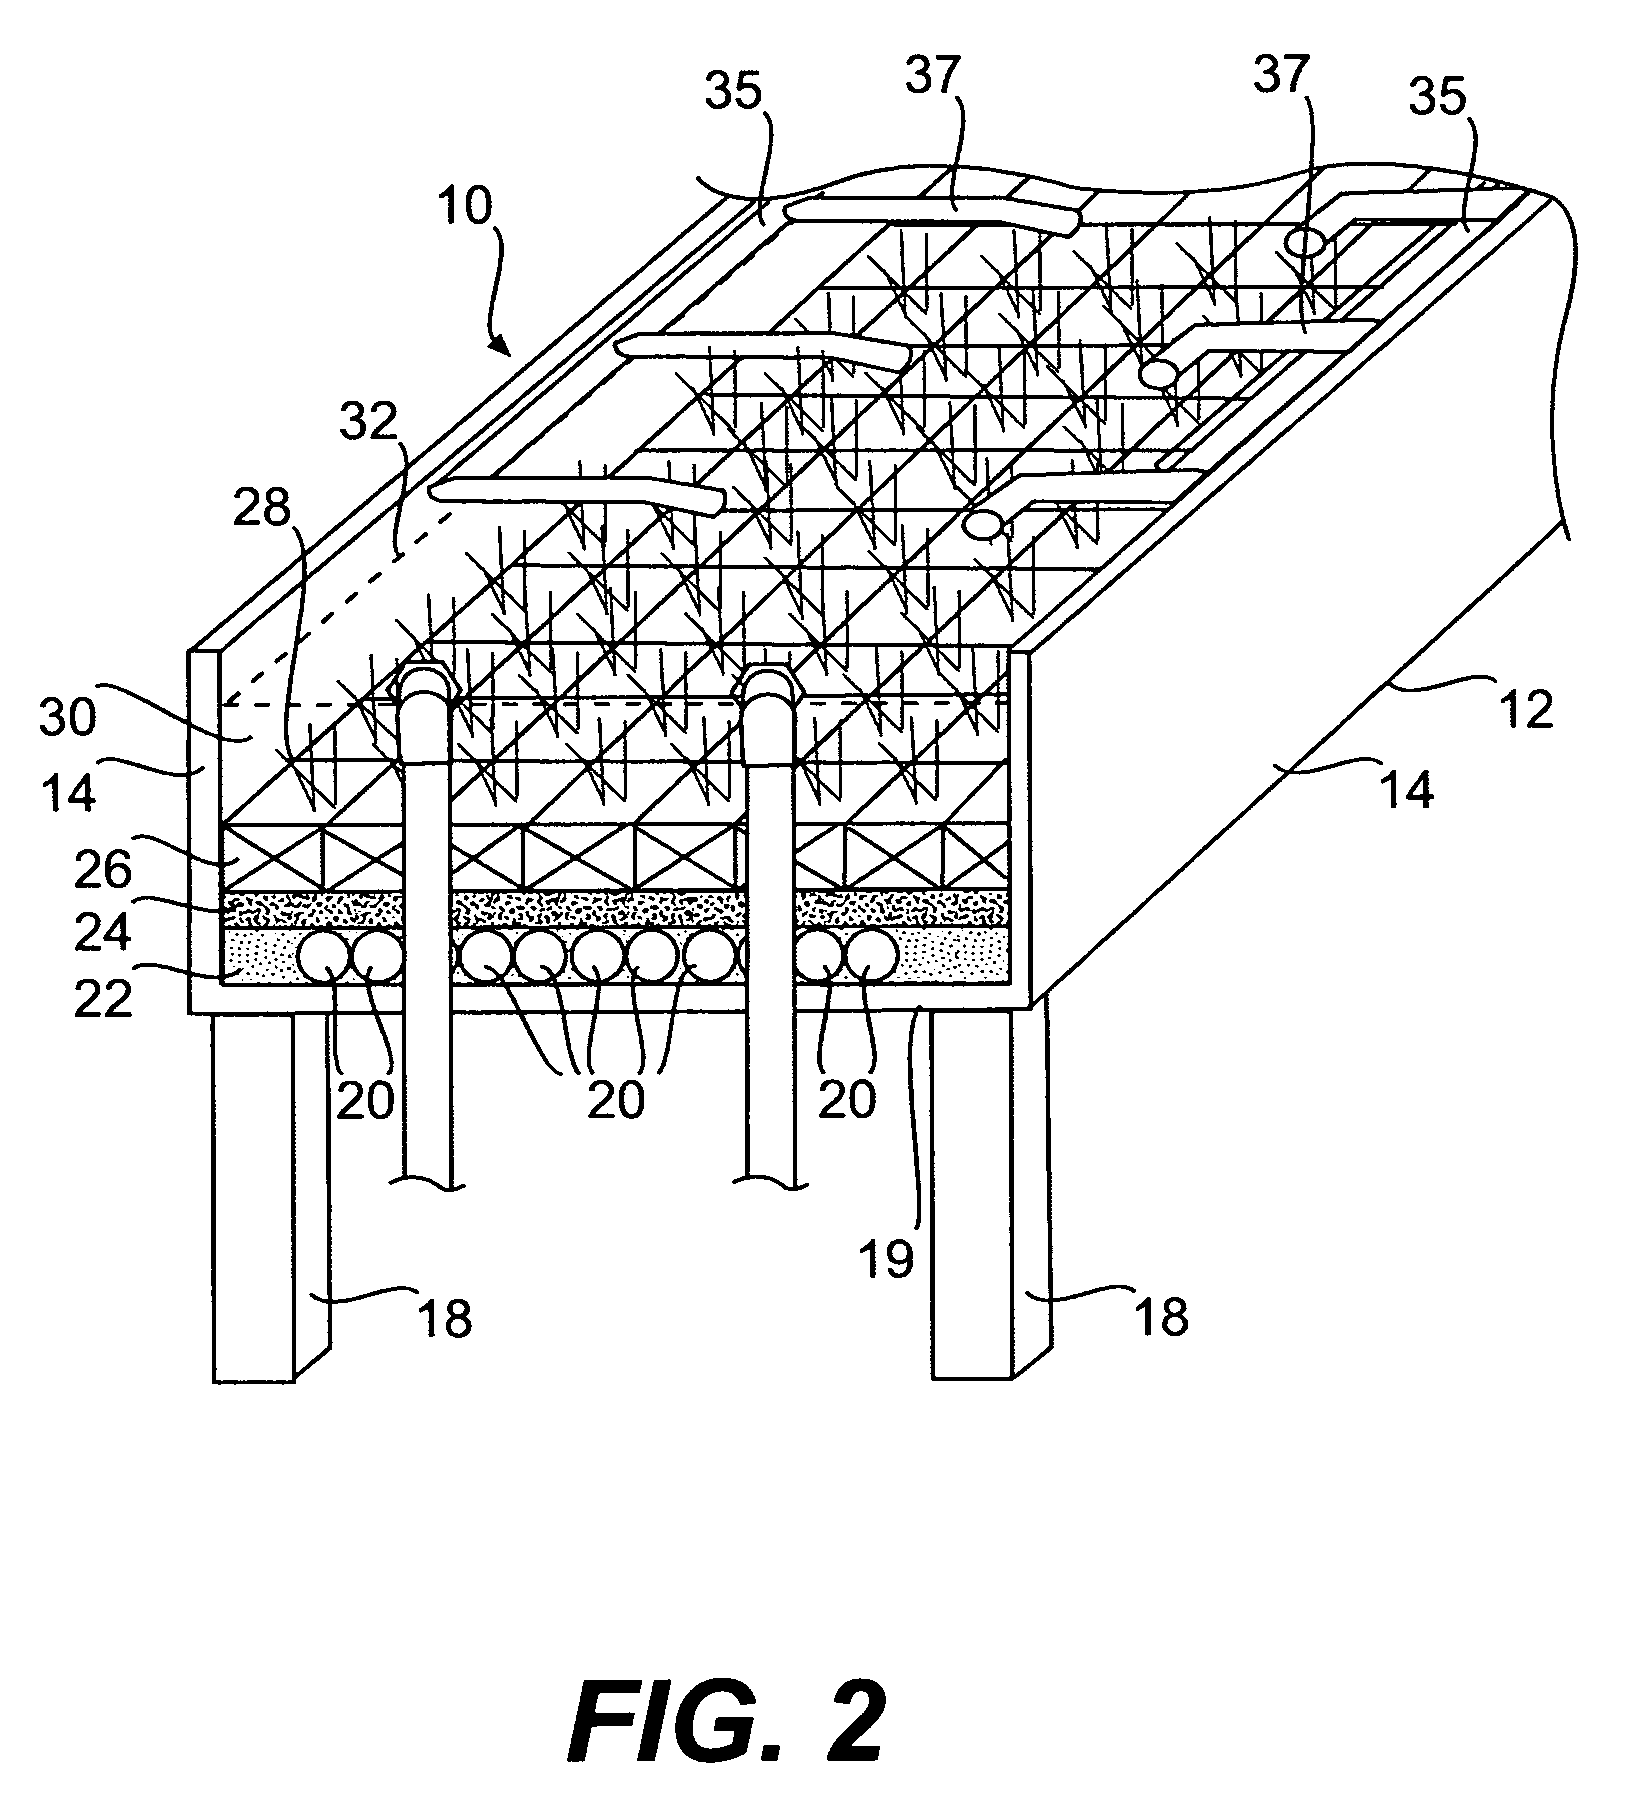 Method and apparatus for cultivation of subaquatic vegetation